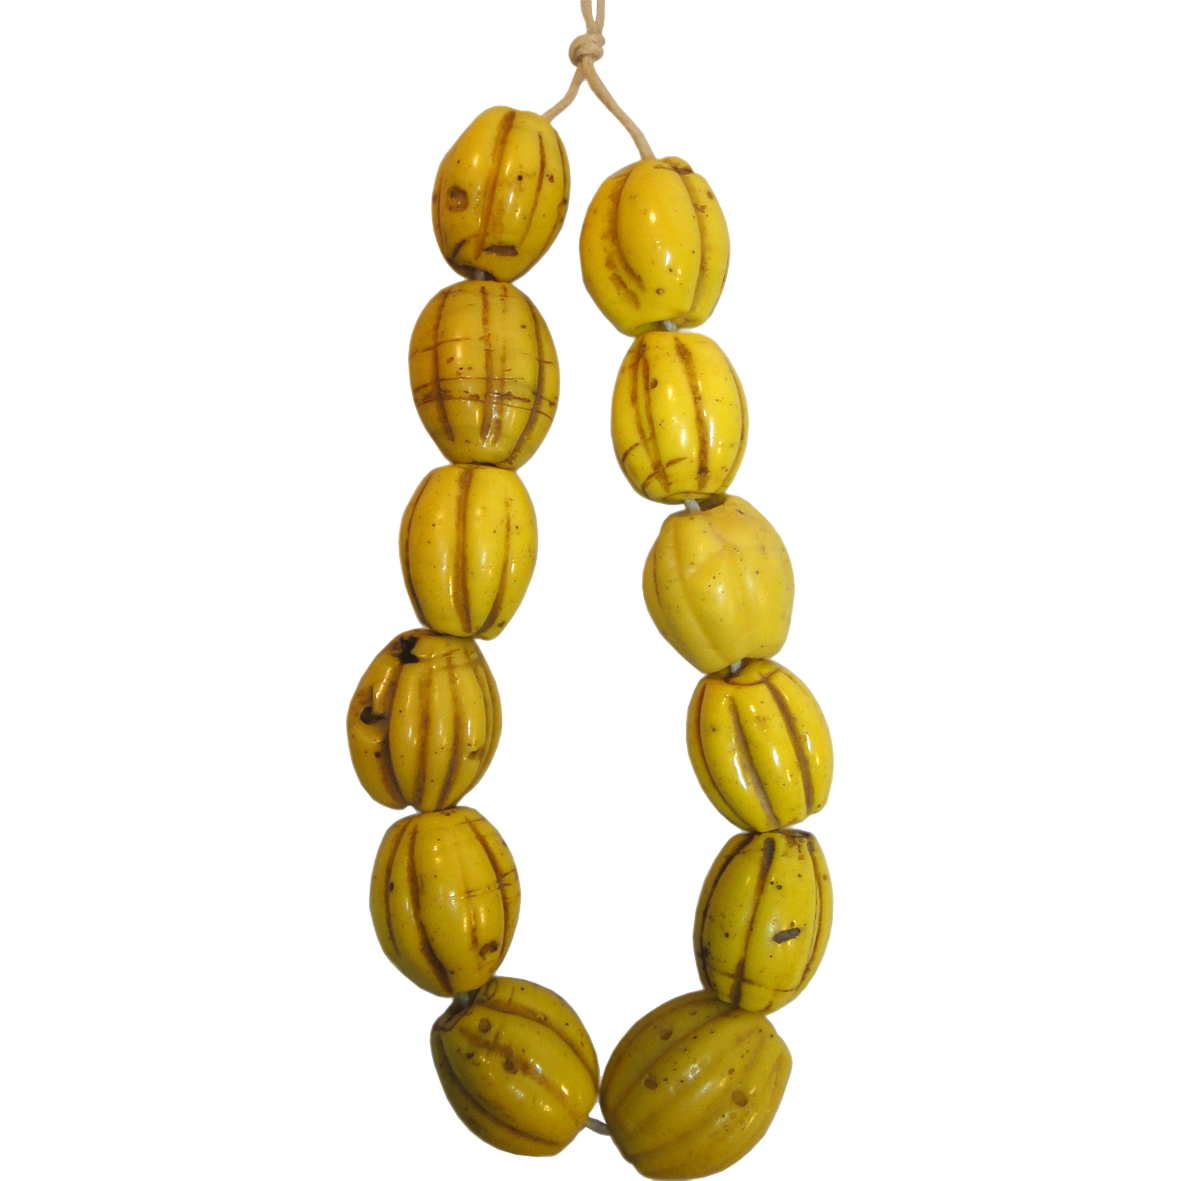 Indonesia, North Coast of Papua, Necklace from Yellow Glass Beads (reverse)